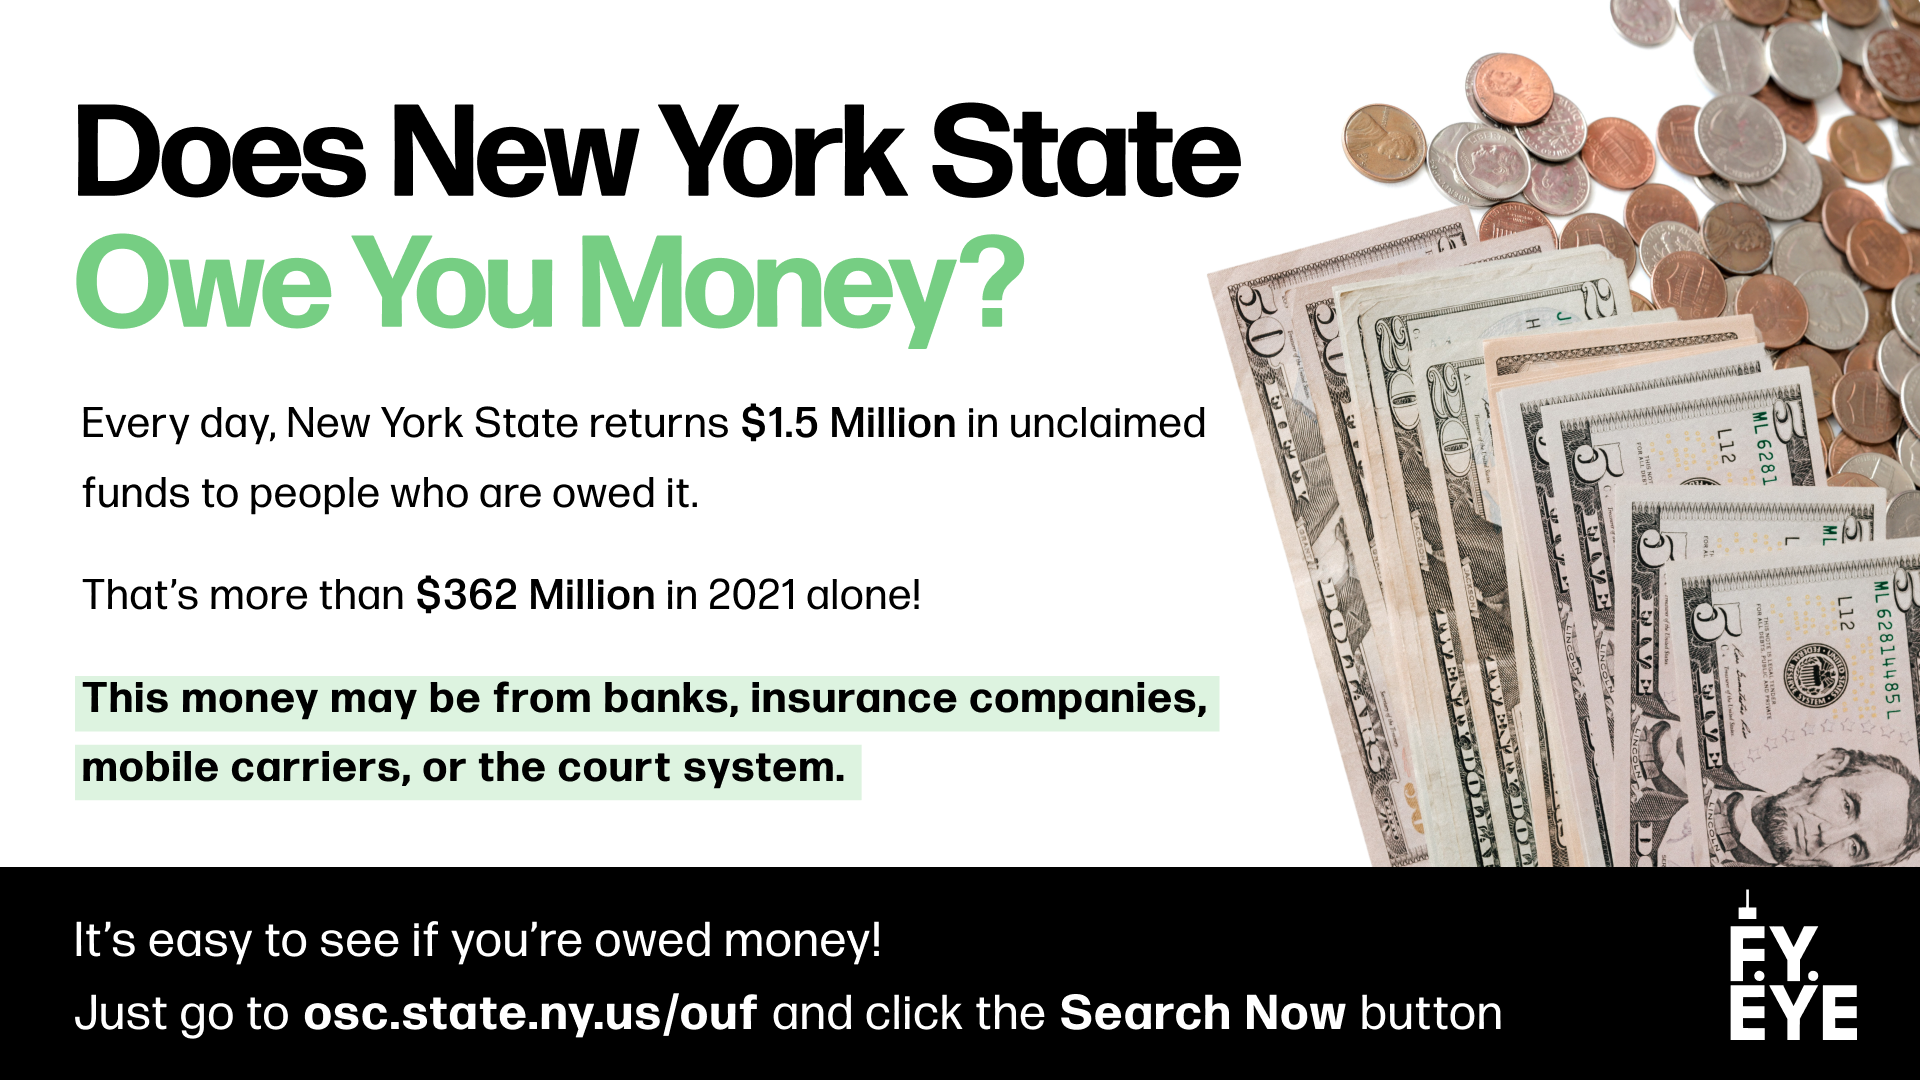 Does New York State Owe You Money? banner